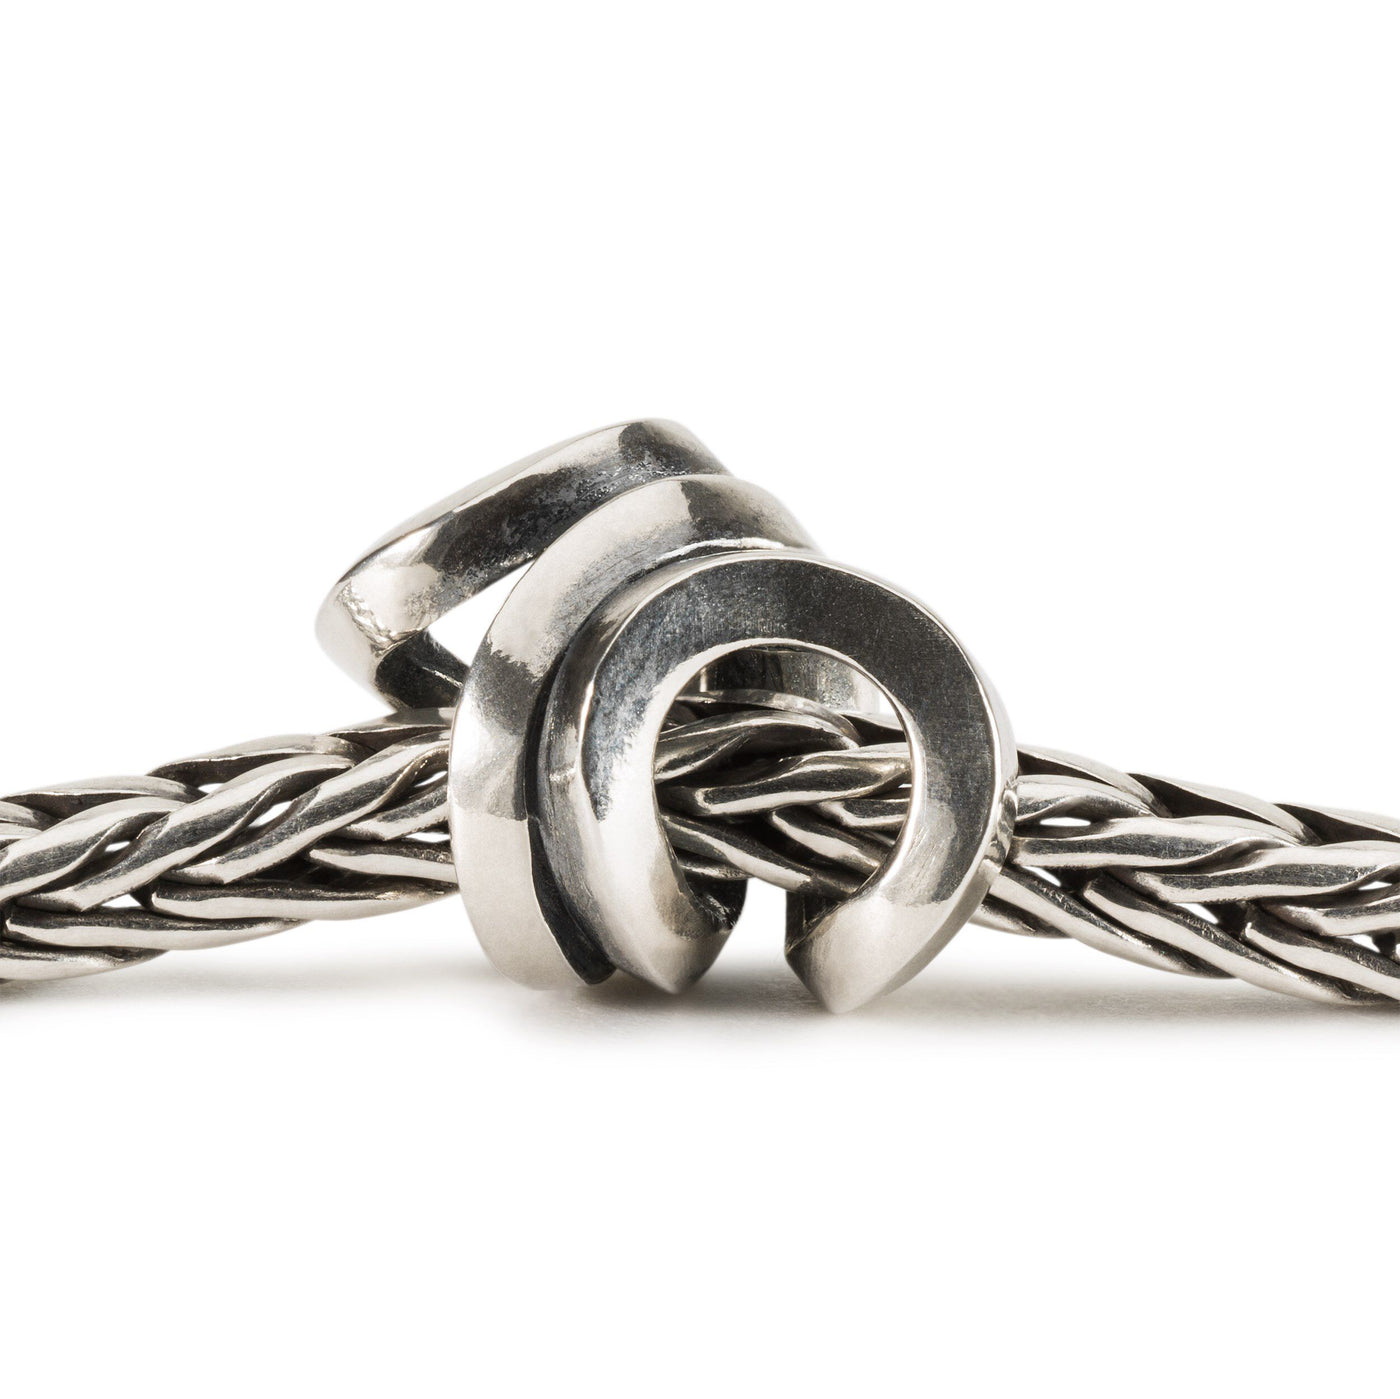 Compassion Knot - Trollbeads Canada